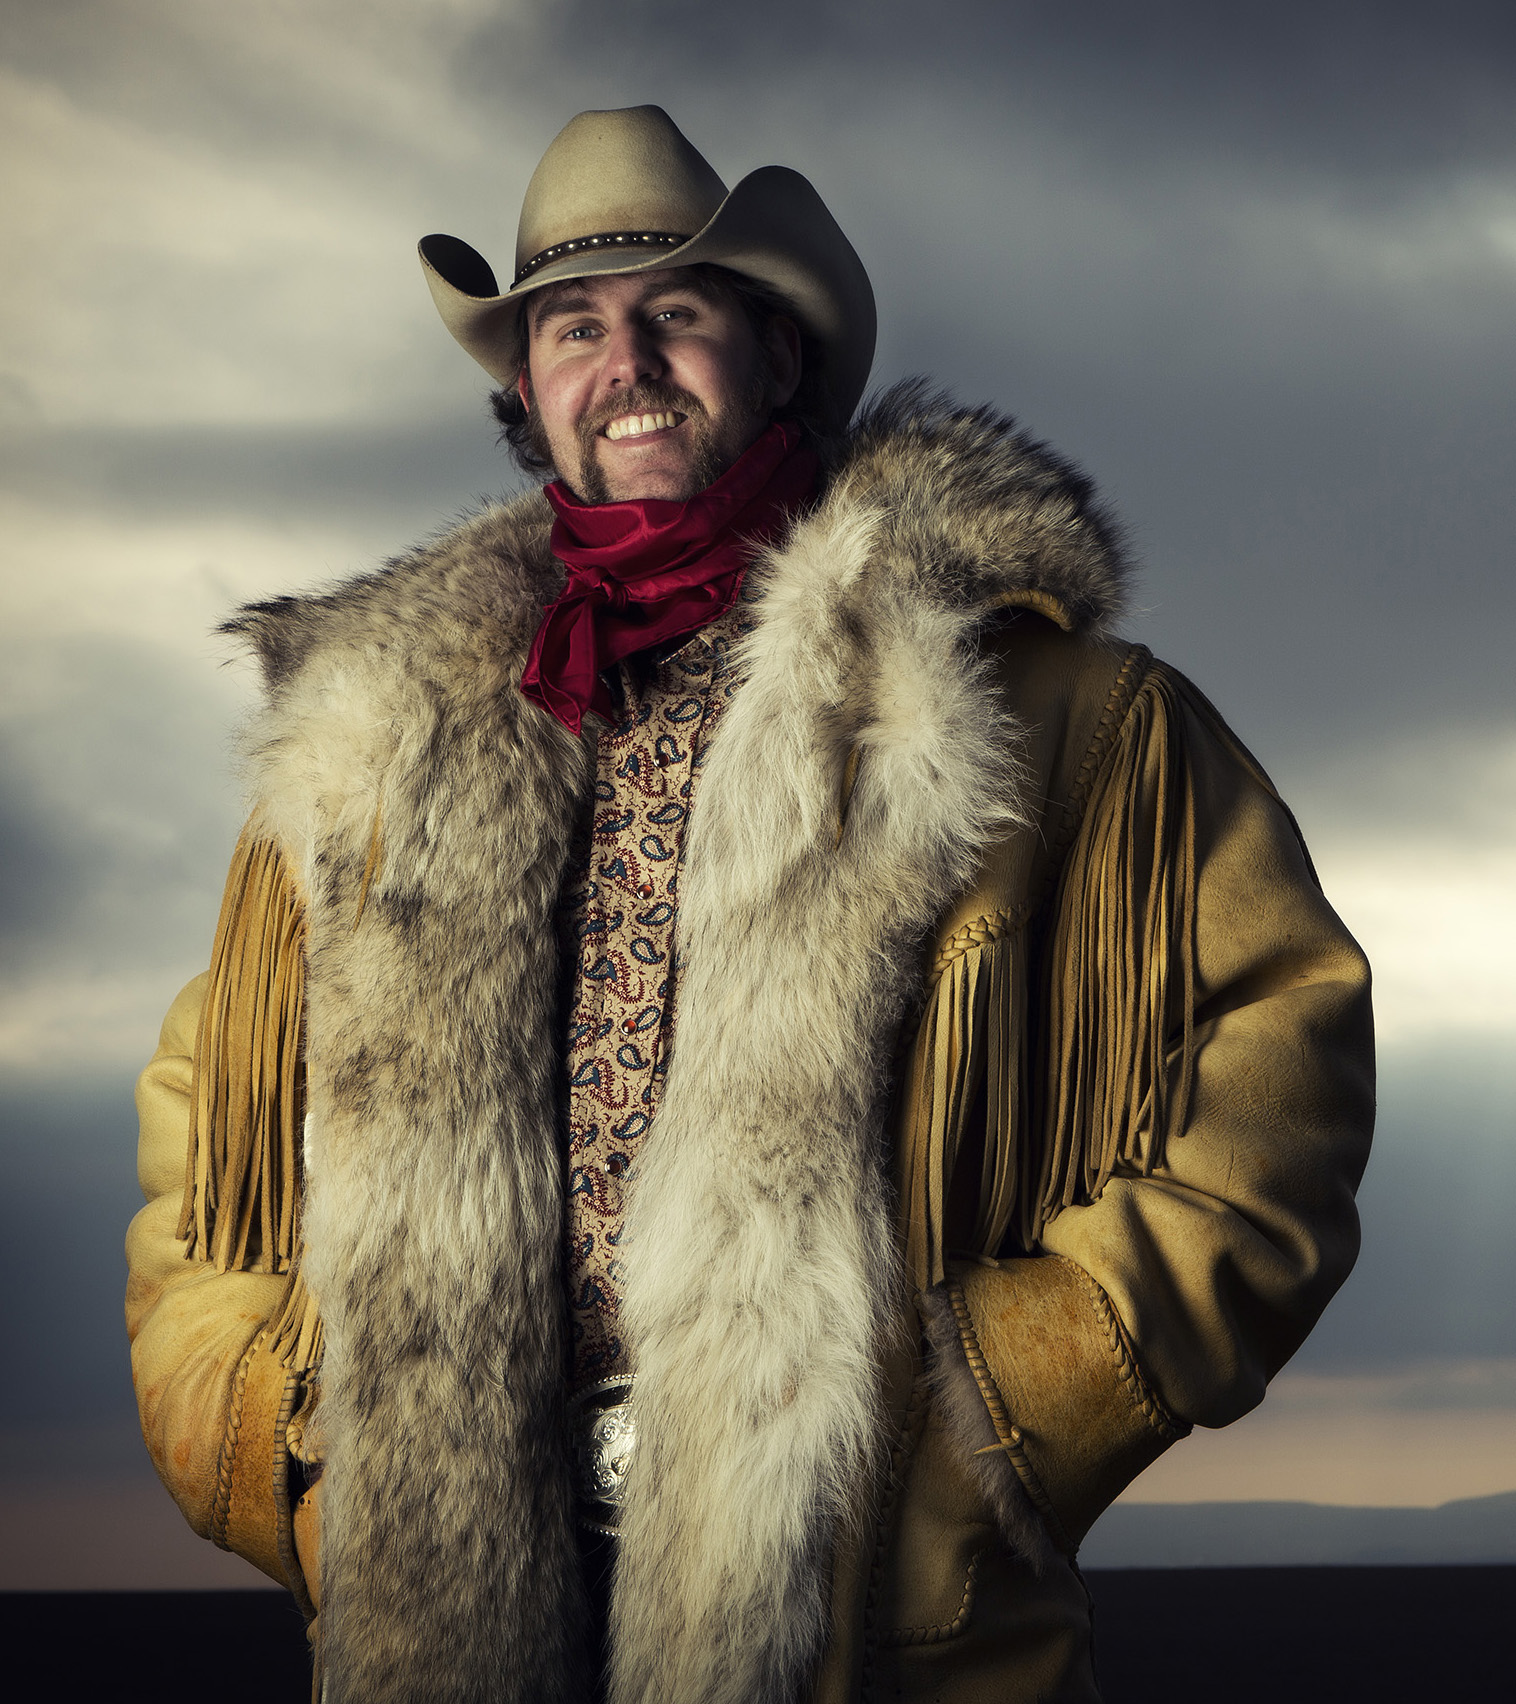 Tim Hus, Cowboy Singer - What's Up in Wells